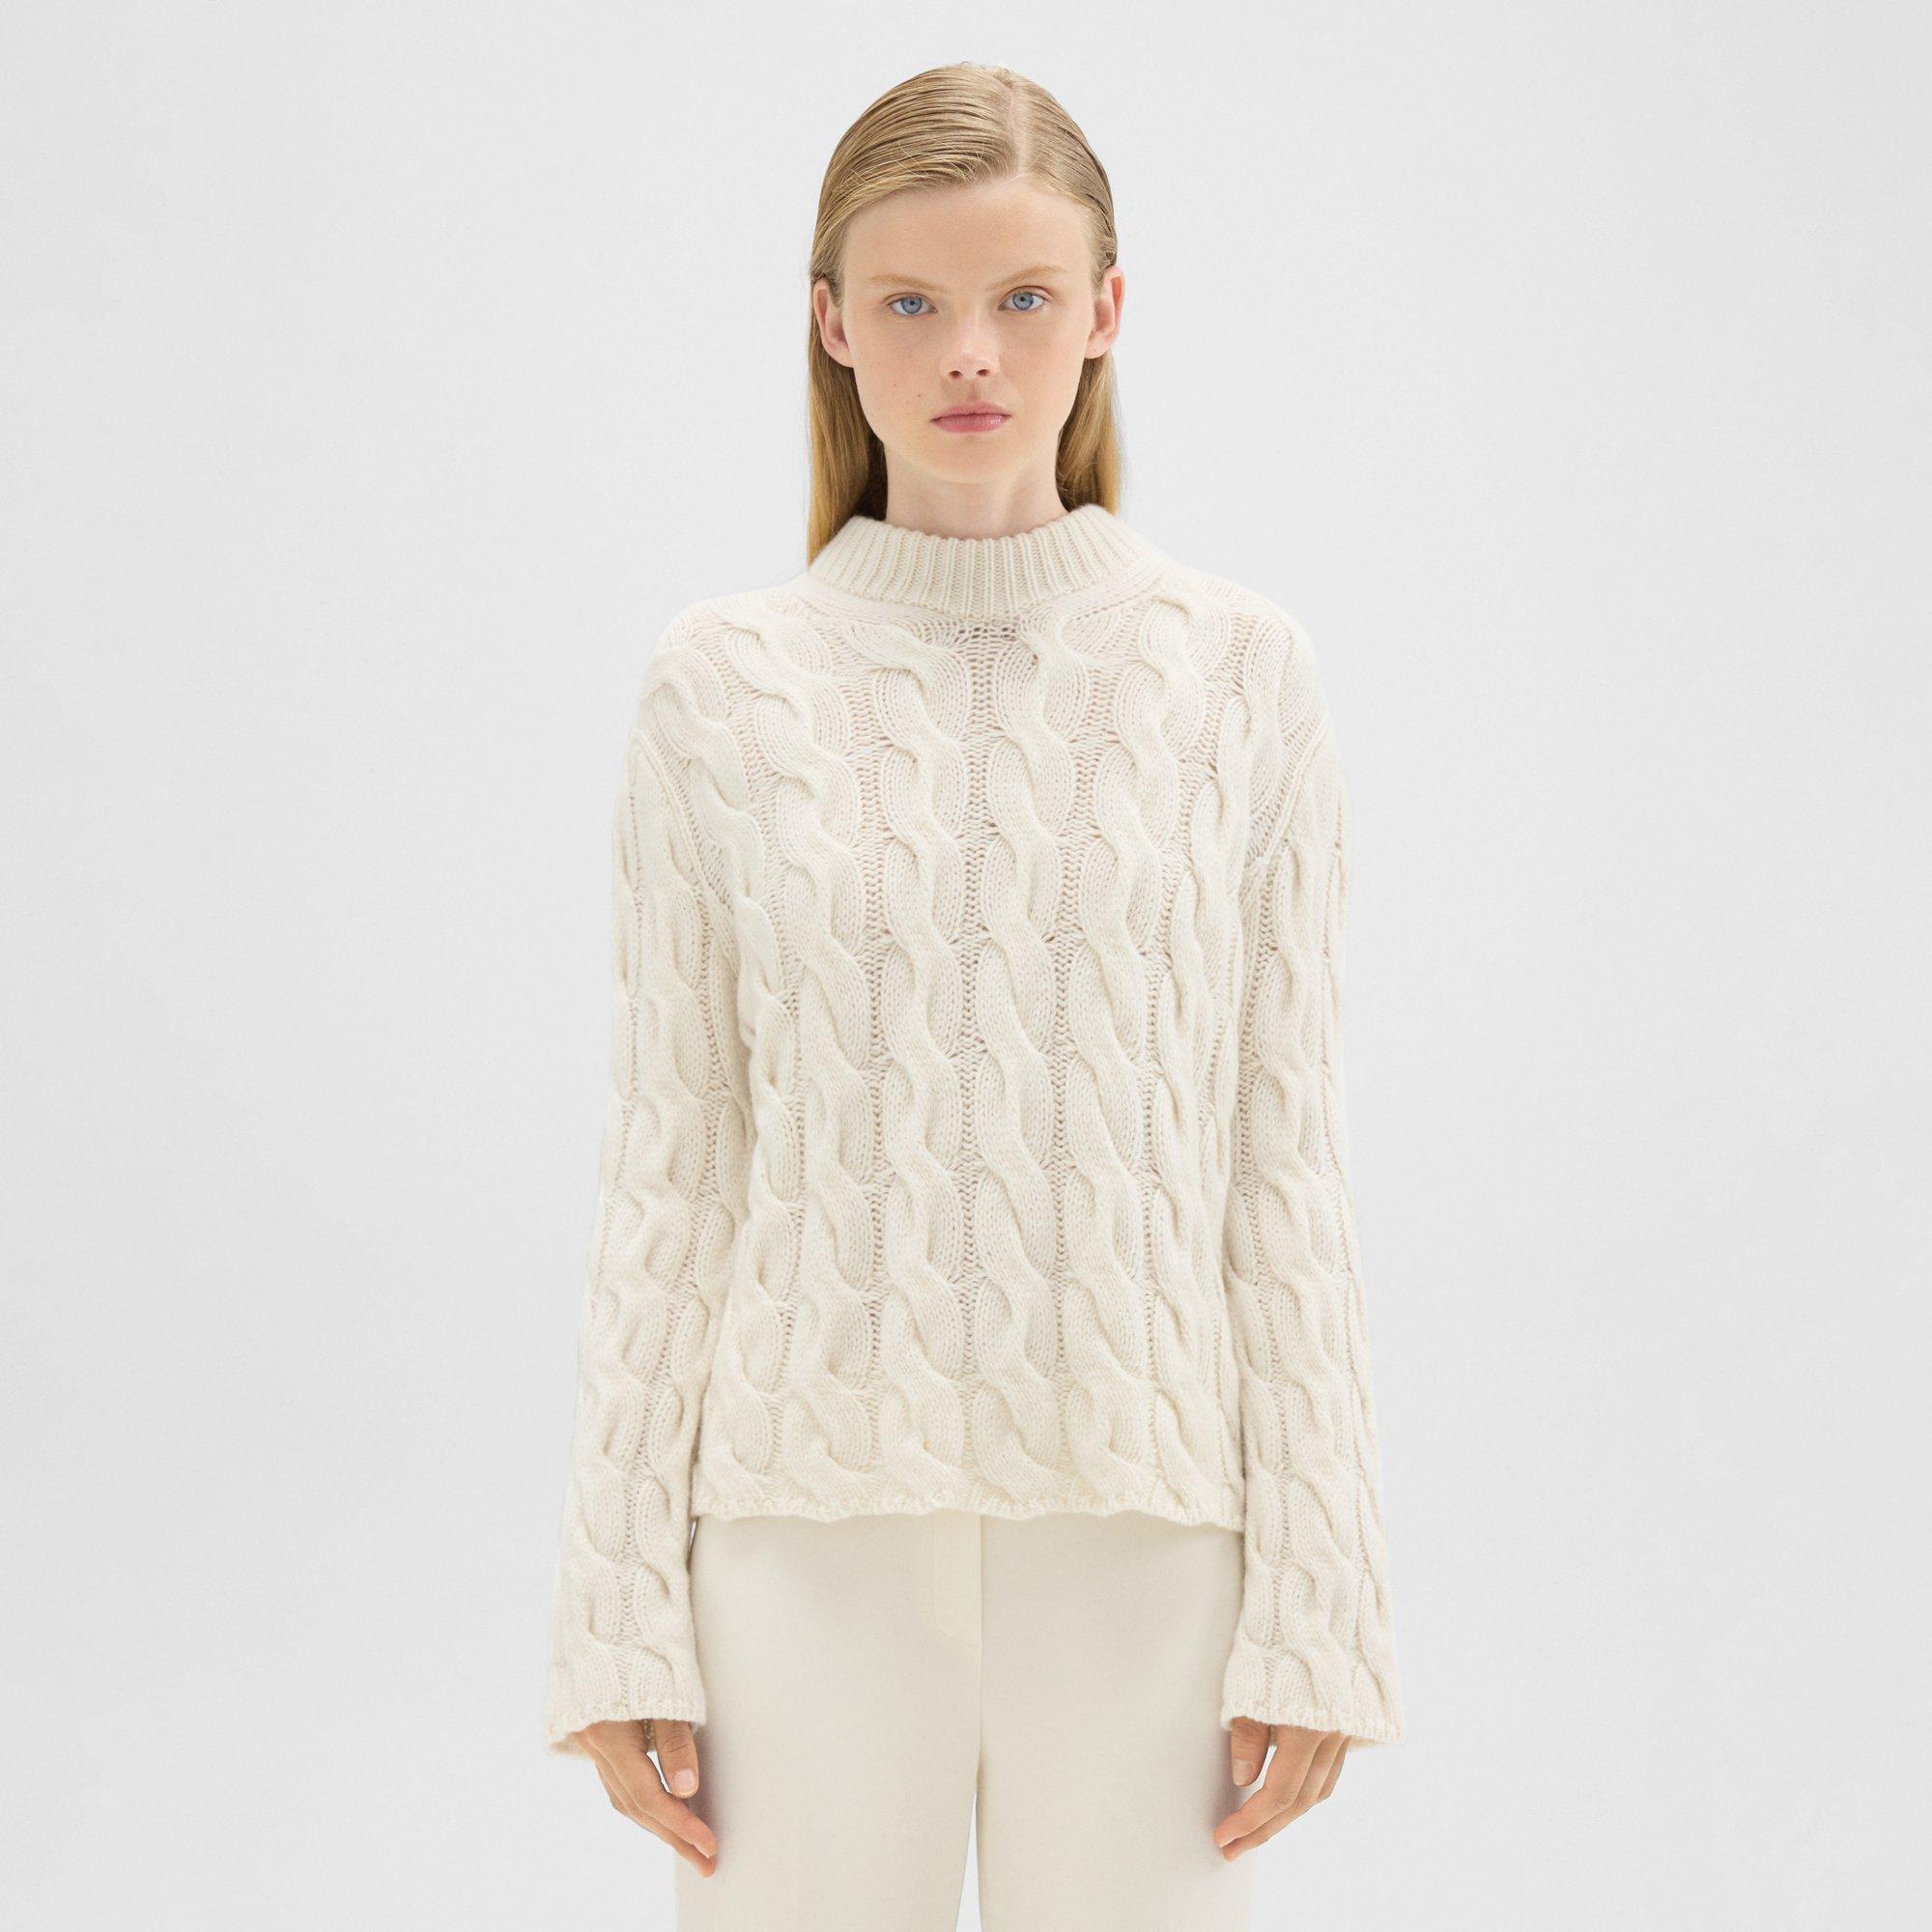 Theory Cable Knit Mock Neck Sweater in Felted Wool-Cashmere